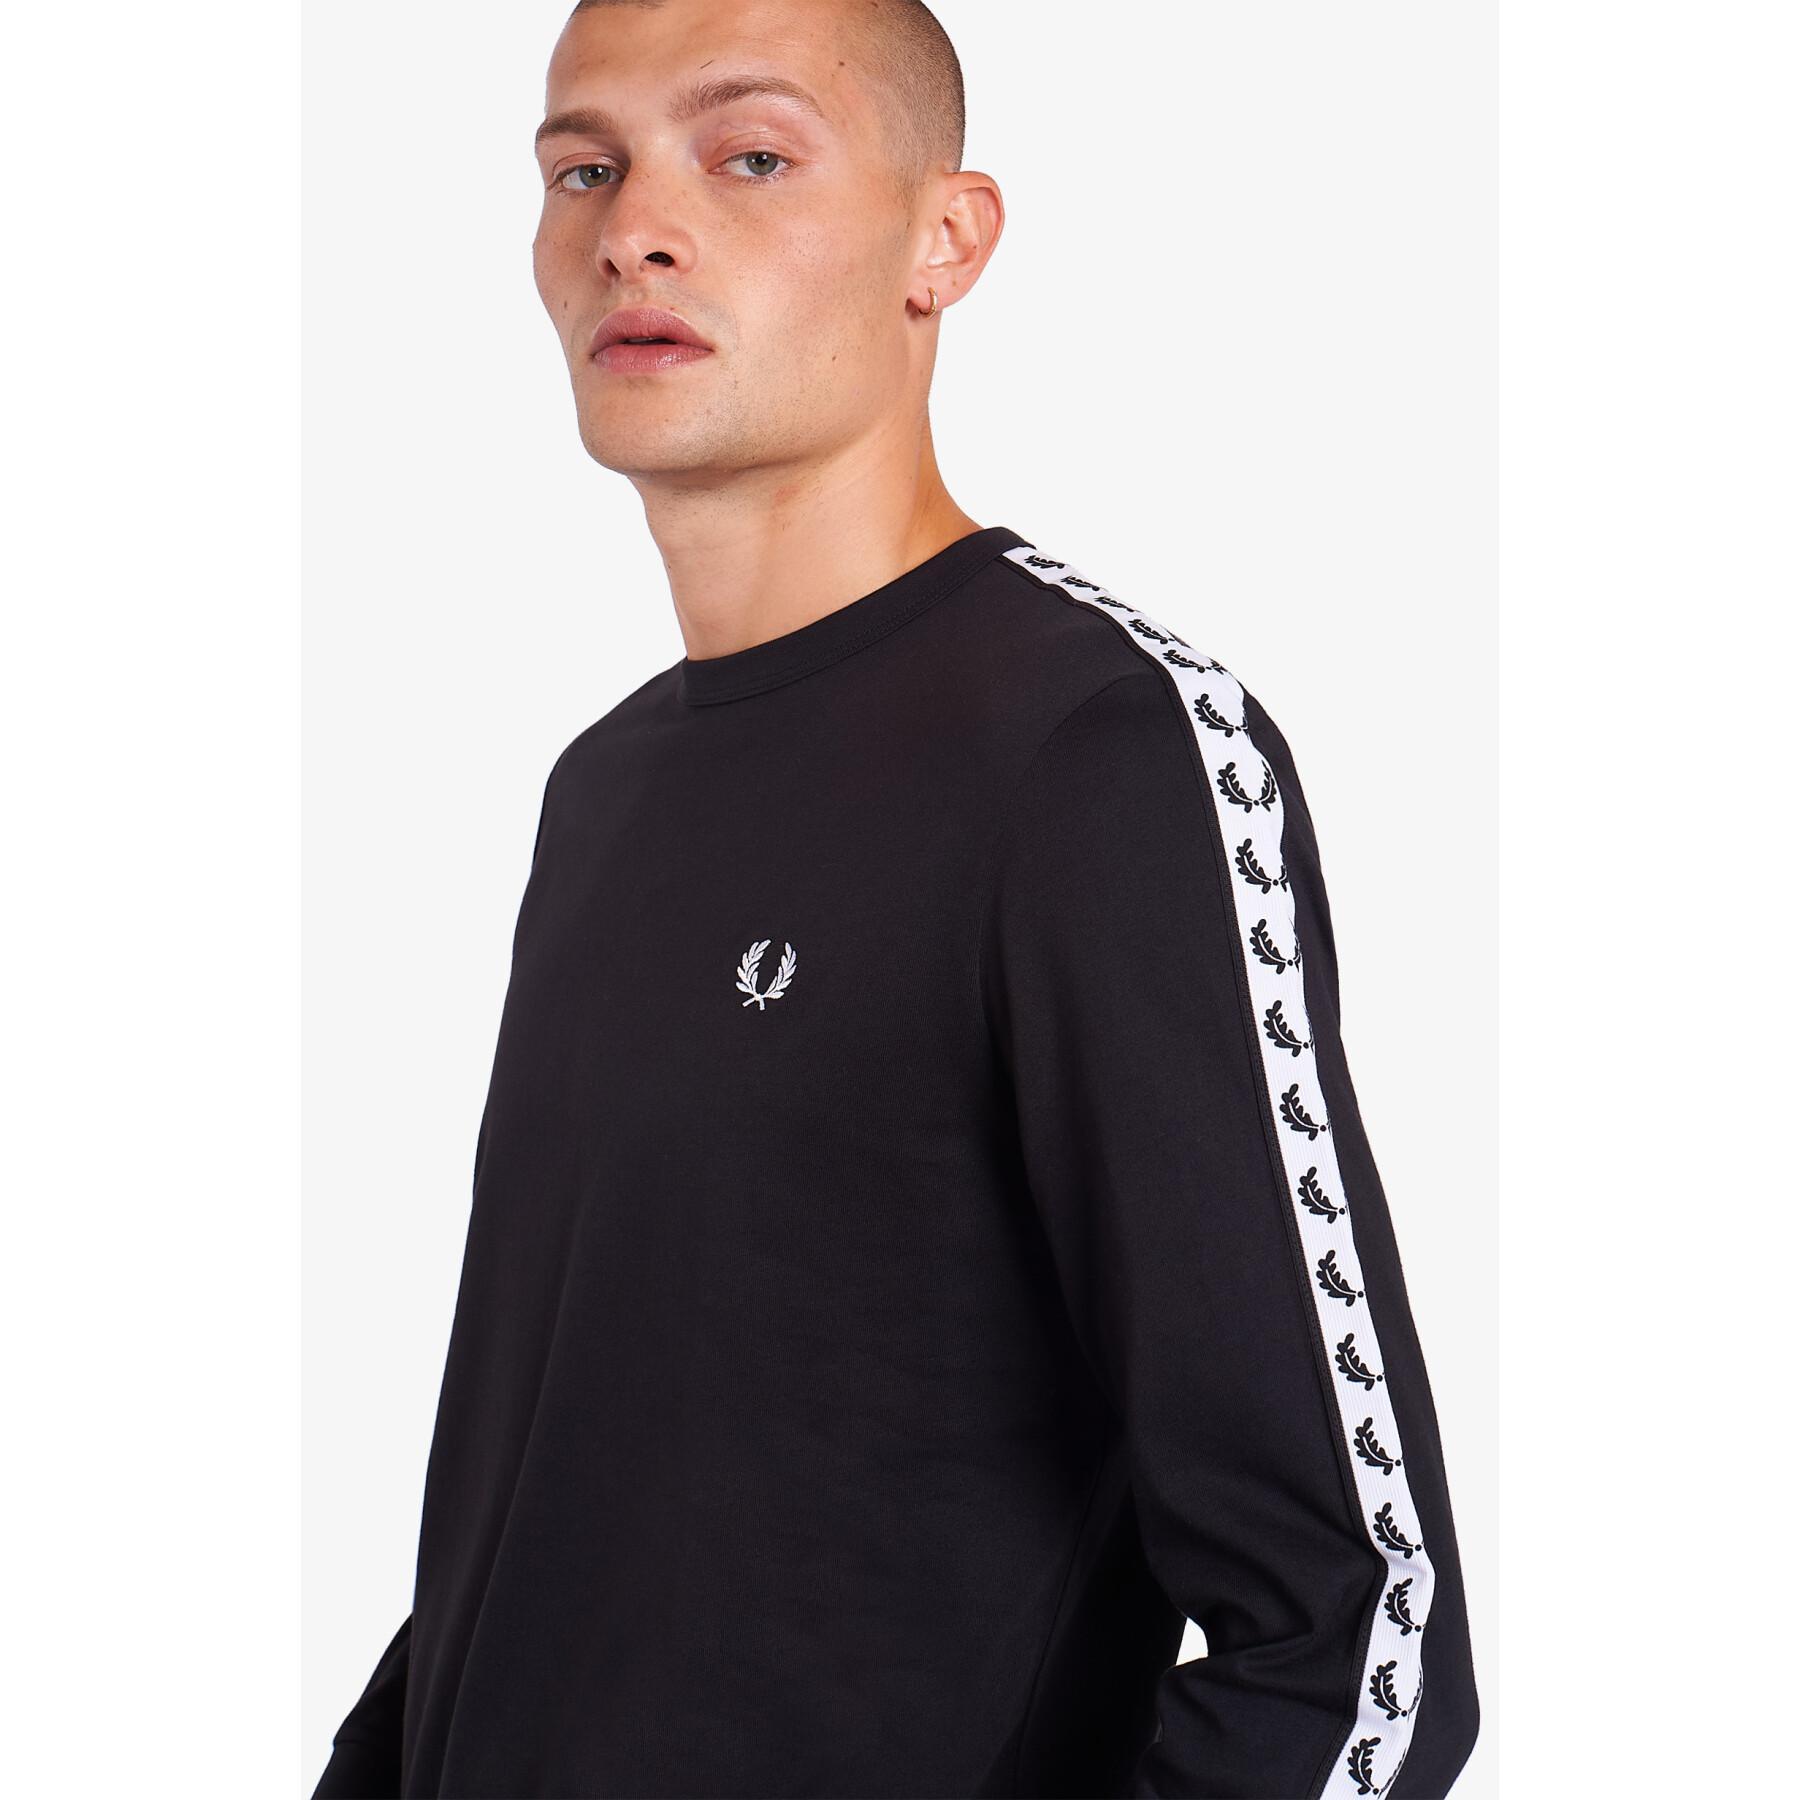 Camiseta Fred Perry Taped